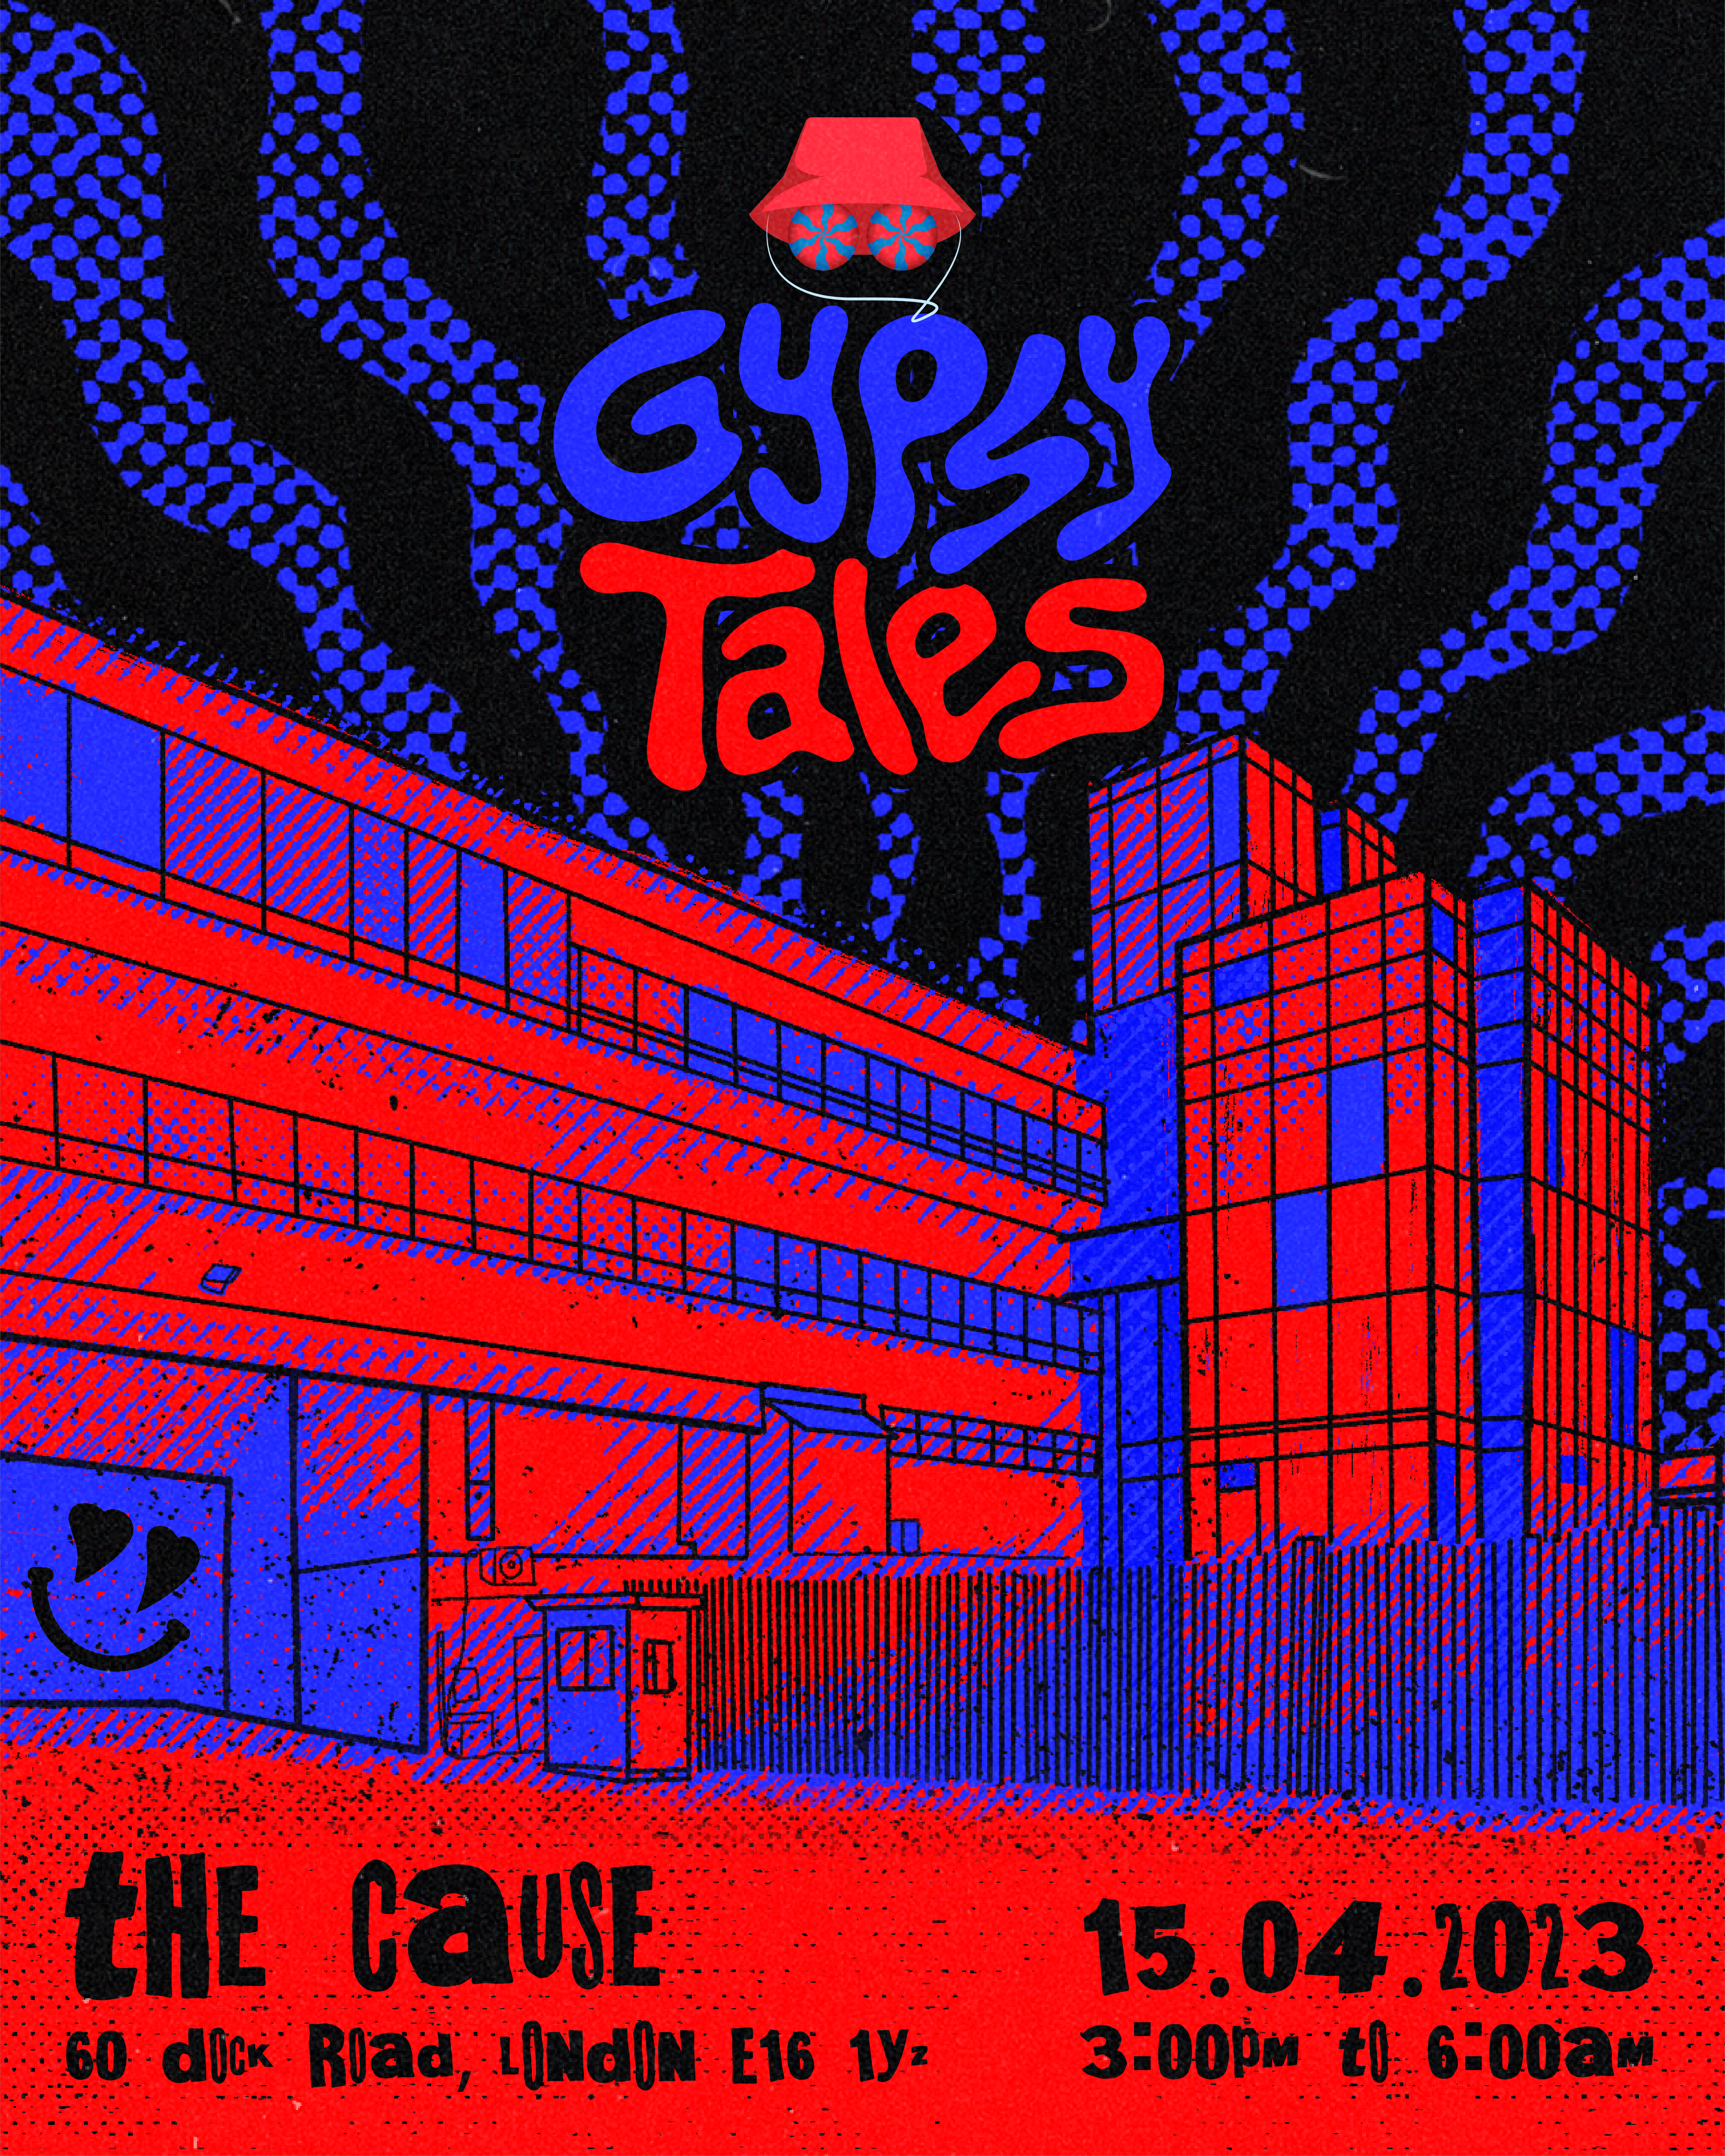 Gypsy Tales day n' night w/ Ian Pooley, GNMR, Marlie, John Swing +More @60 Dock Road (theCause) - フライヤー表